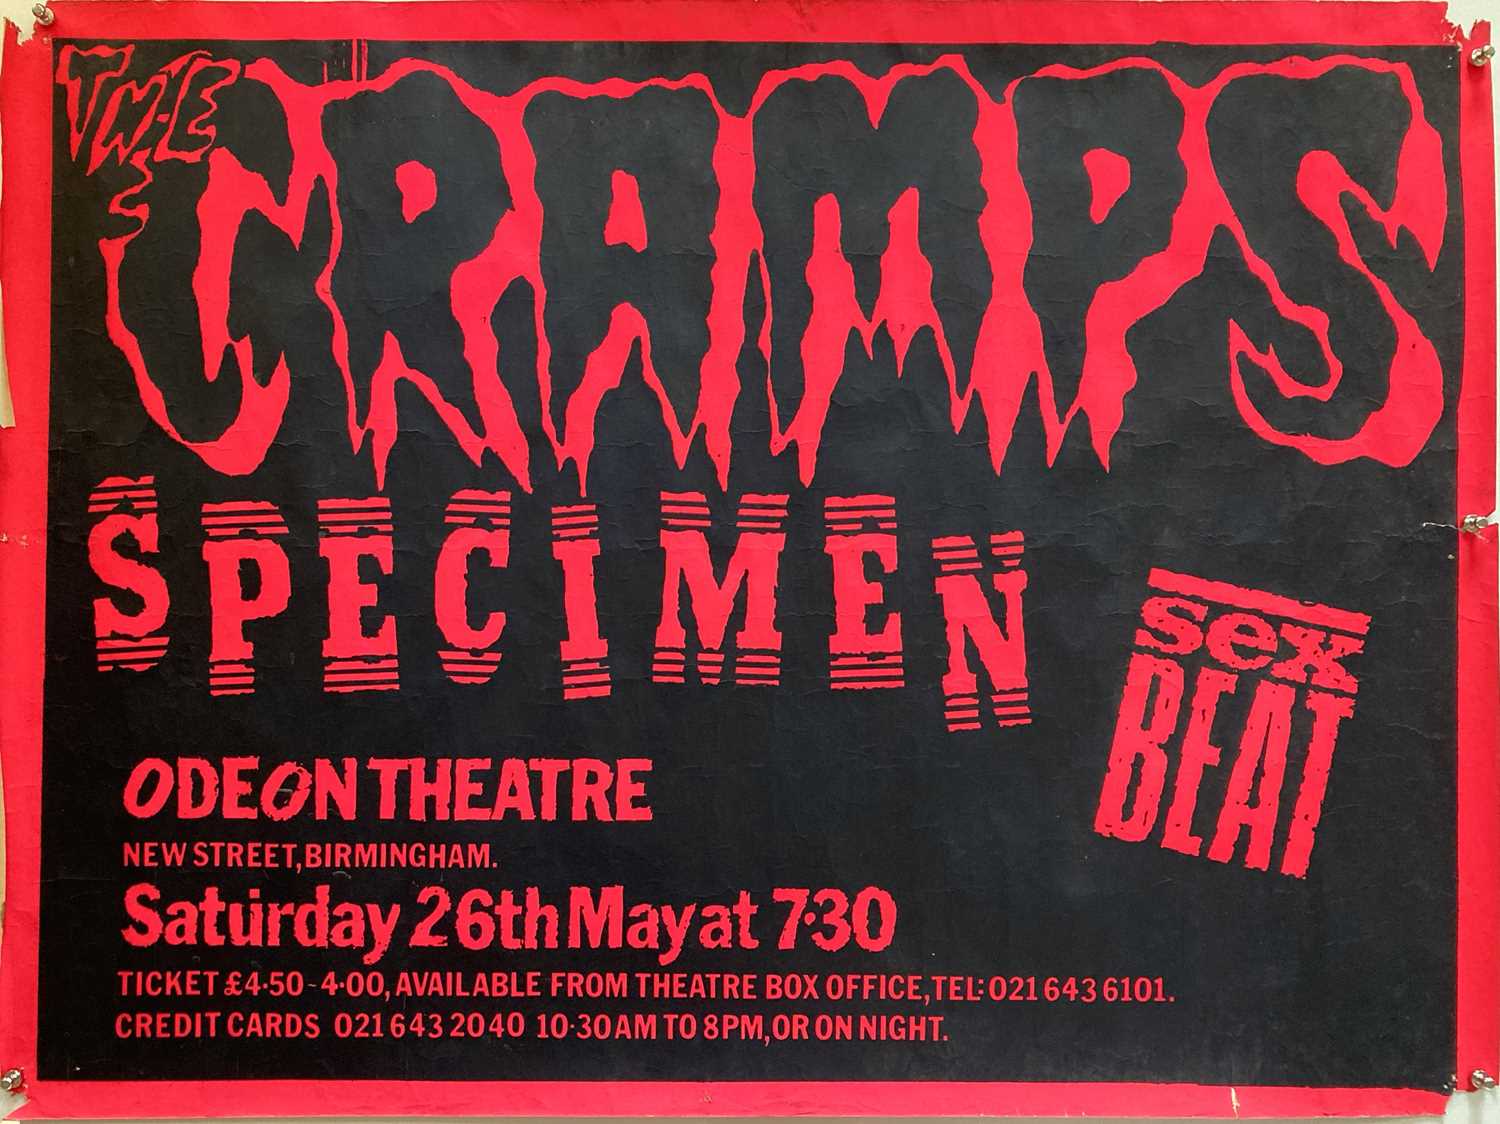 Lot 349 - THE CRAMPS HAMMERSMITH ODEON 1984 POSTER.